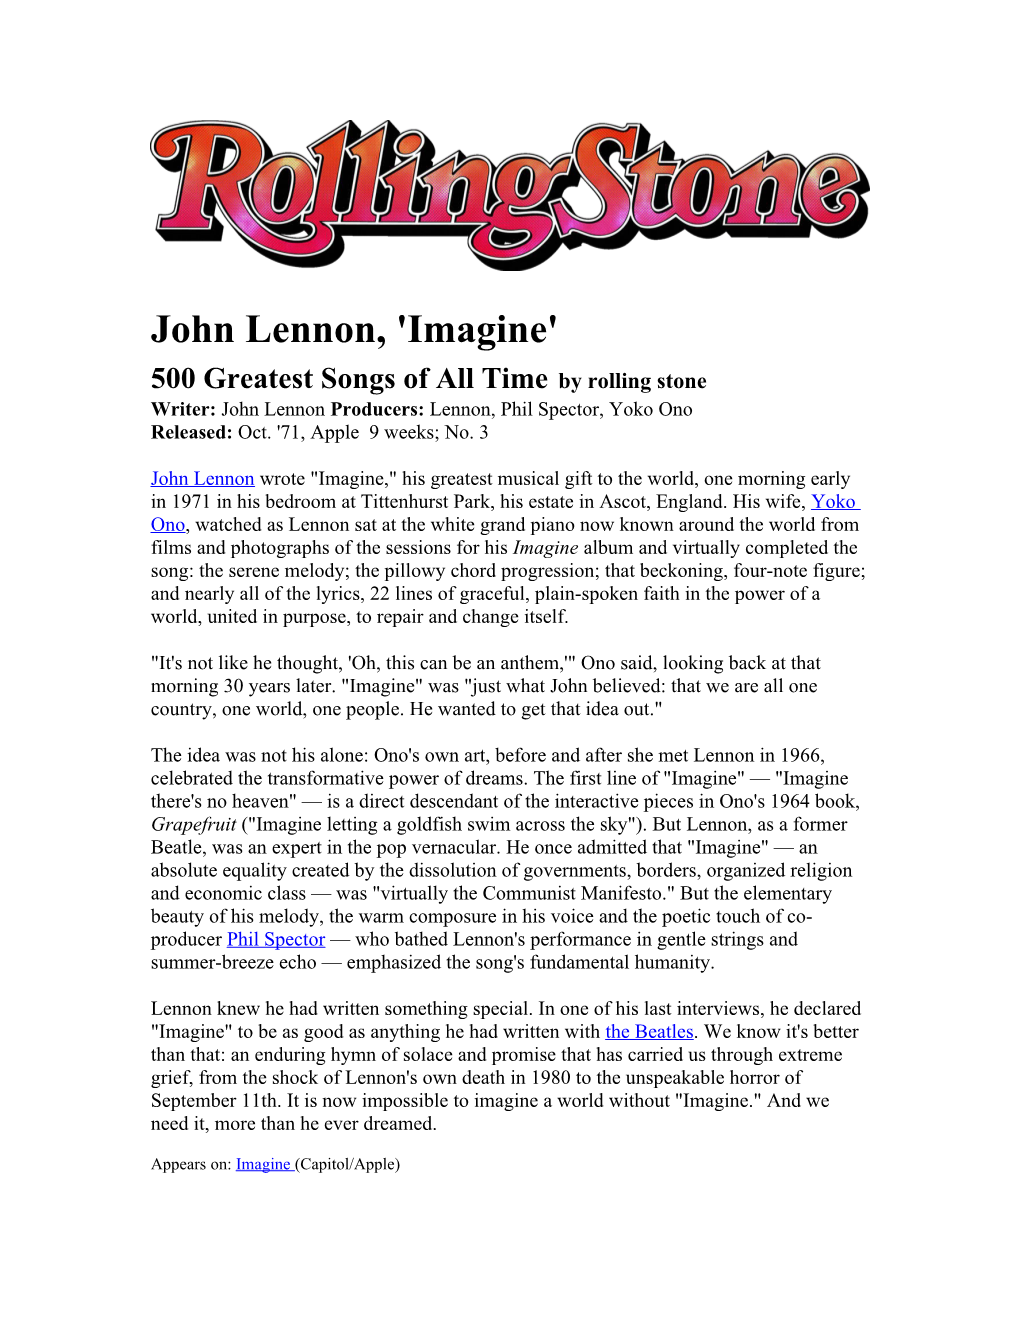 500 Greatest Songs of All Timeby Rolling Stone